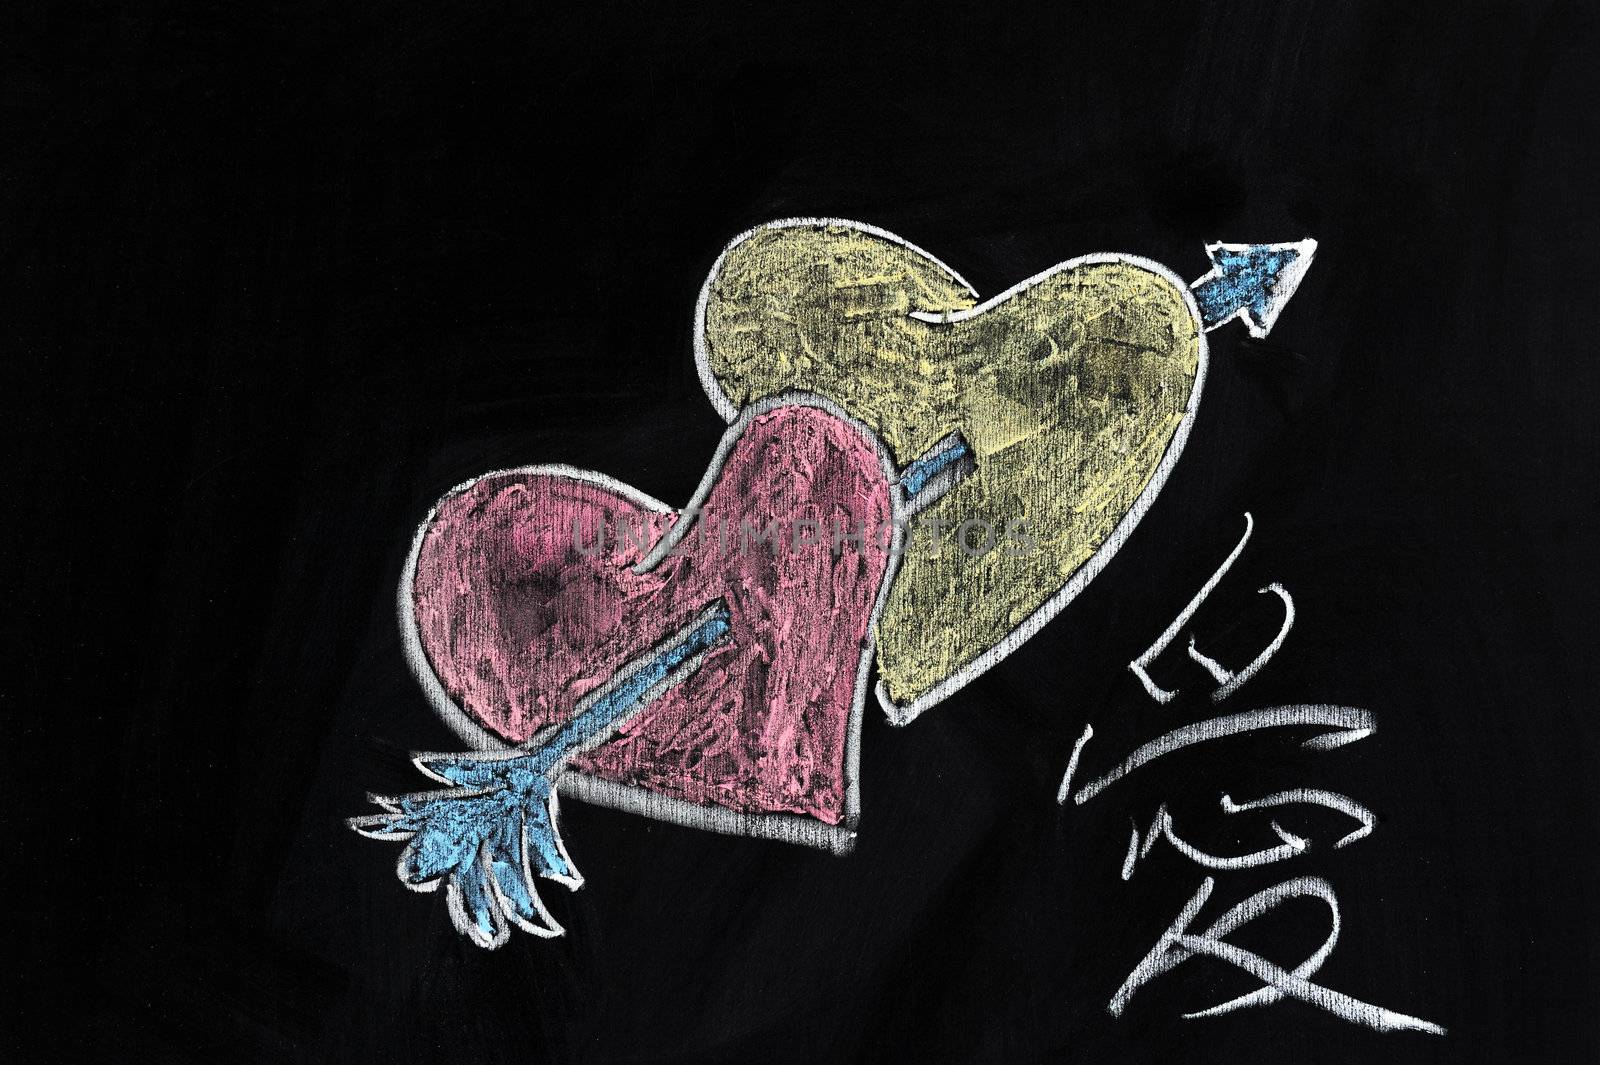 Chalk drawing - Hearts, arrow and "Love" word in Chinese